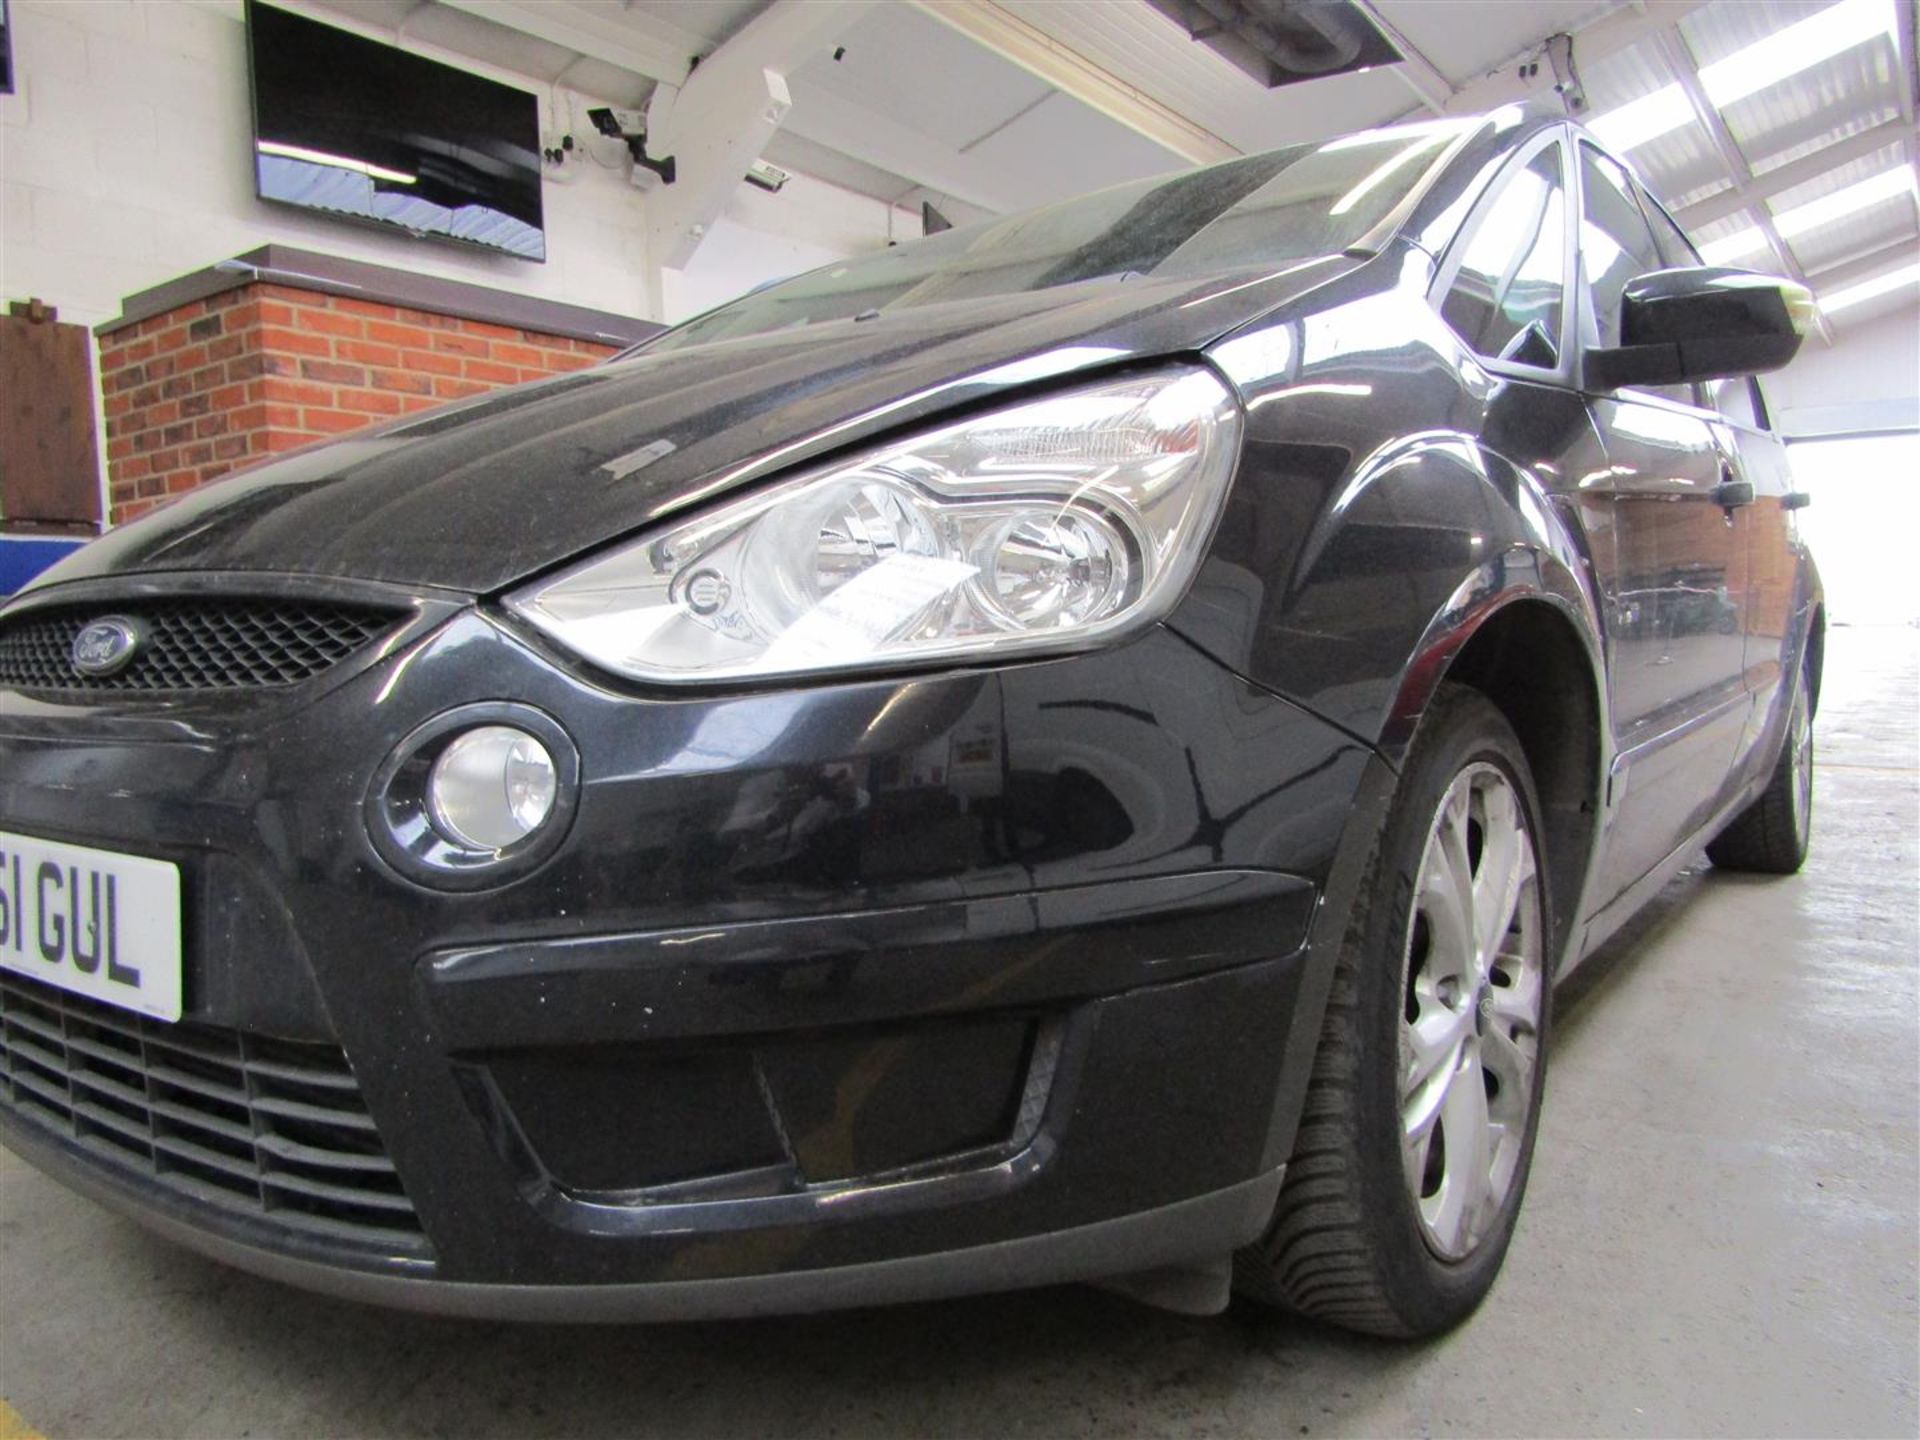 08 08 Ford S-Max LX TDCI 6G - Image 11 of 29